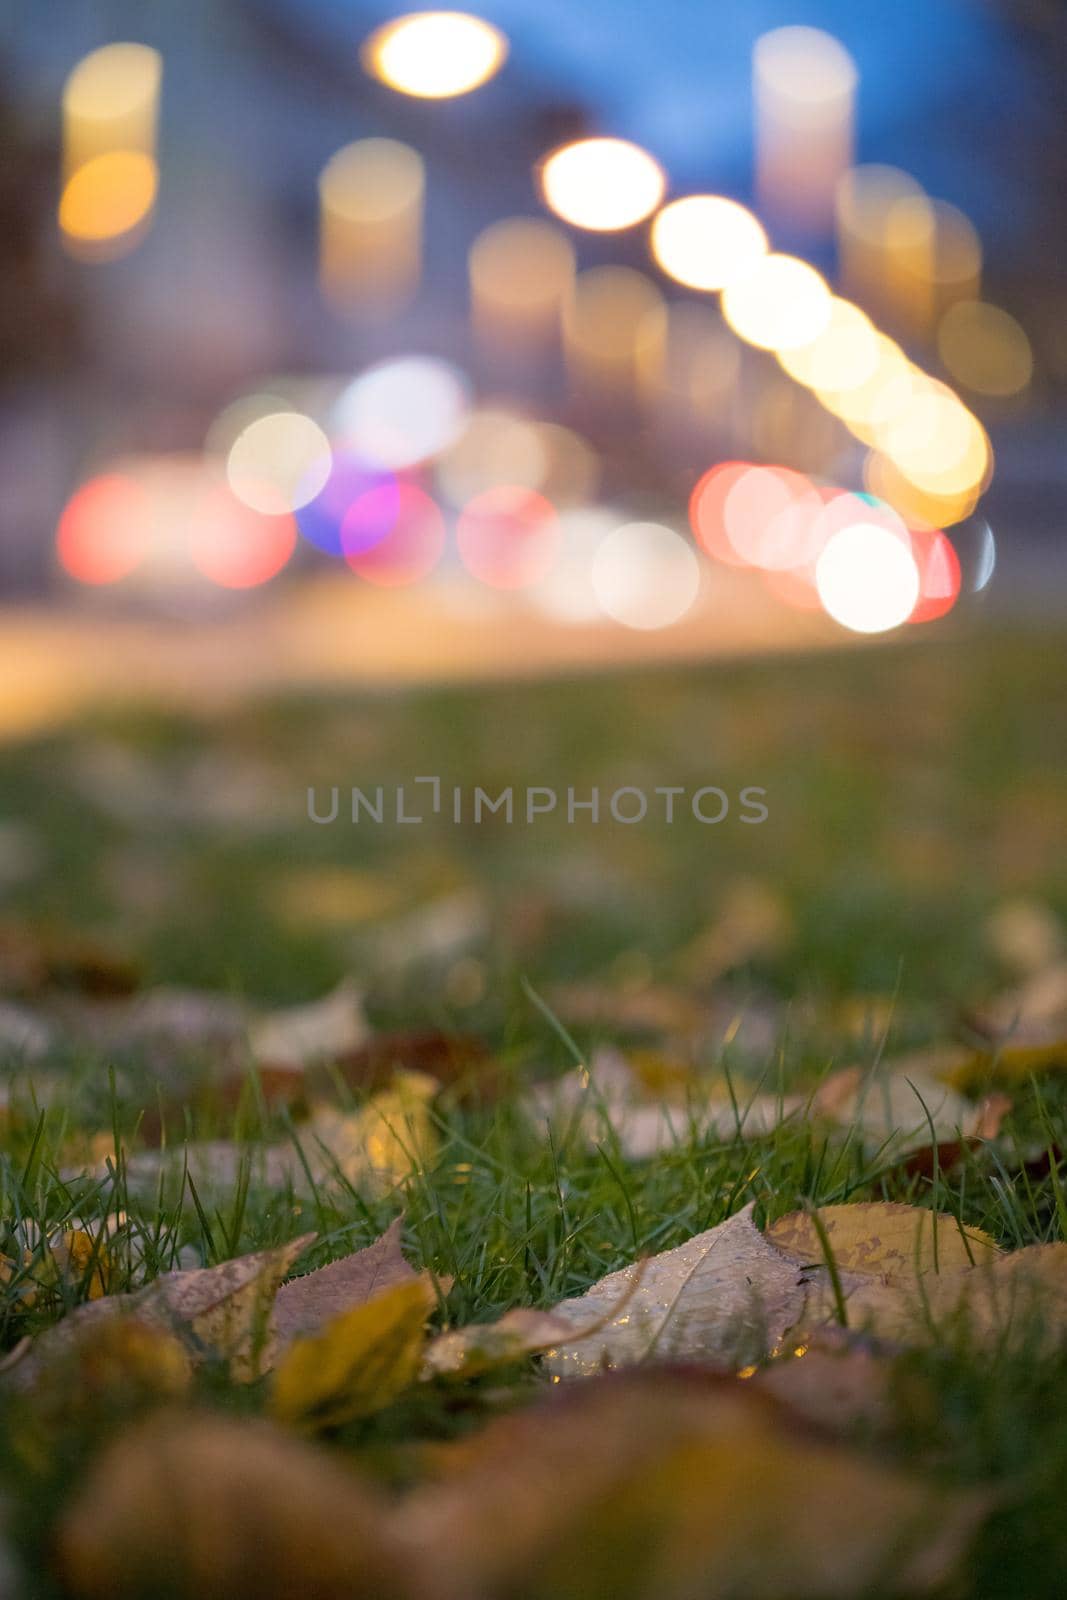 Colorful leaf in the foreground, light dots in the background. Evening. by Daxenbichler